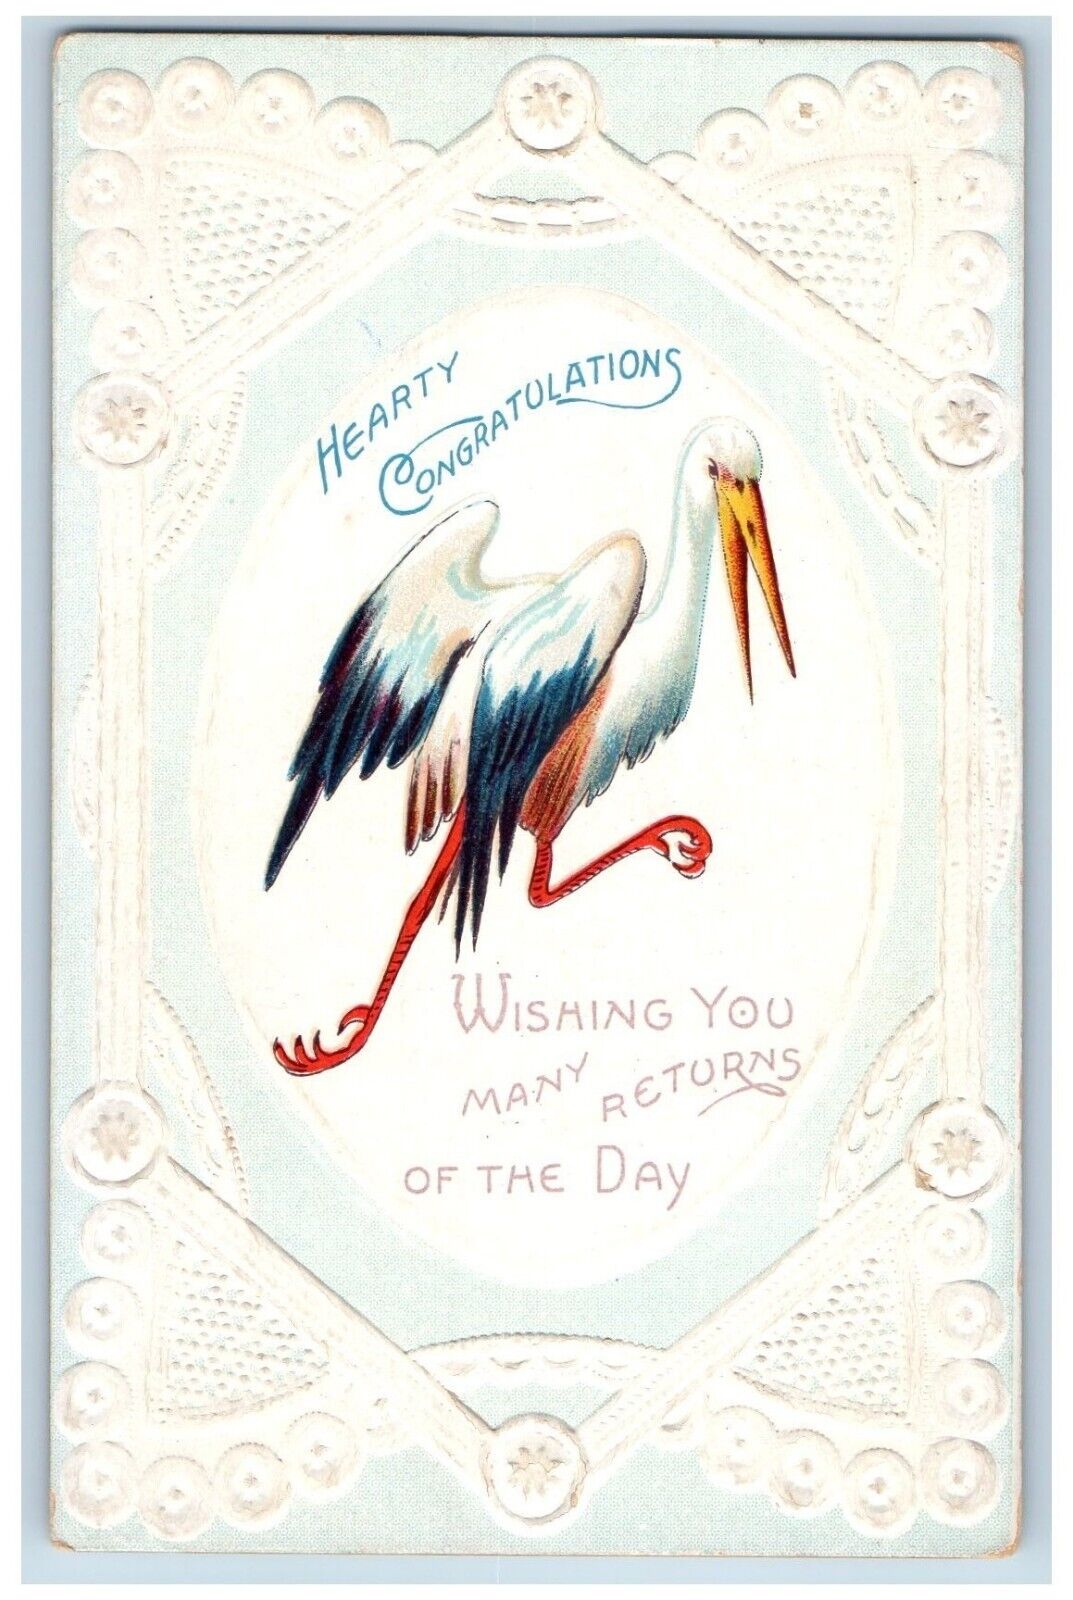 Hearty Congratulations Postcard Stork Many Returns Of The Day Embossed Antique